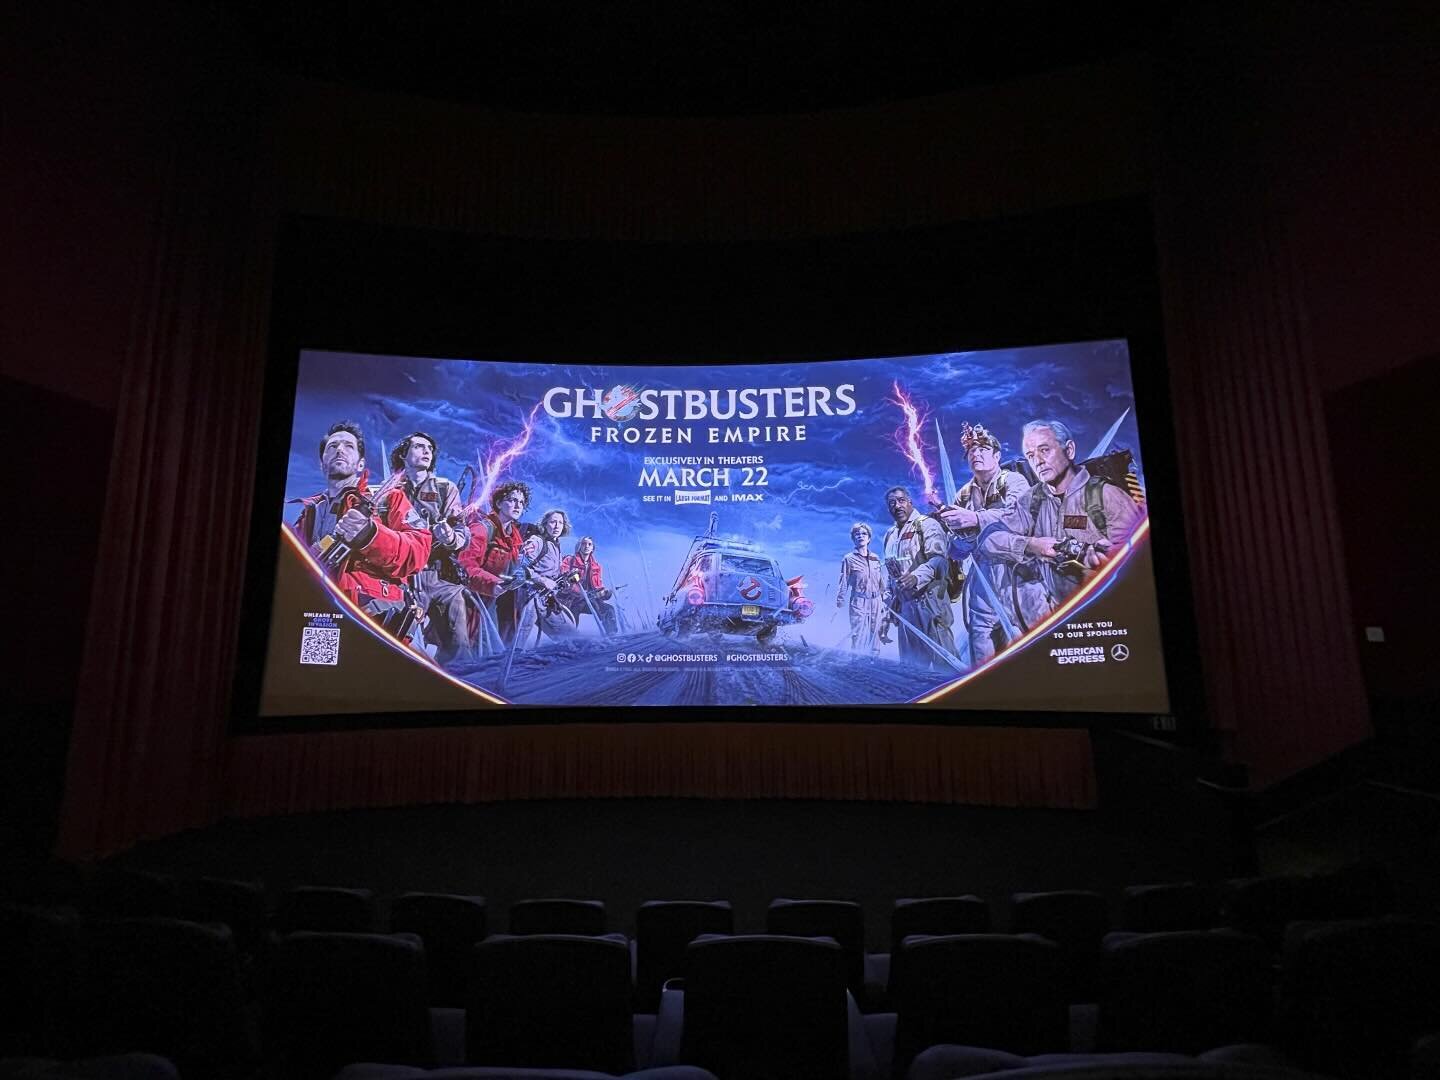 About last night - Ghostbusters: Frozen Empire! Go see it on a big screen, with a big crowd, and a big bag of popcorn. You &mdash; you&rsquo;ve earned it!